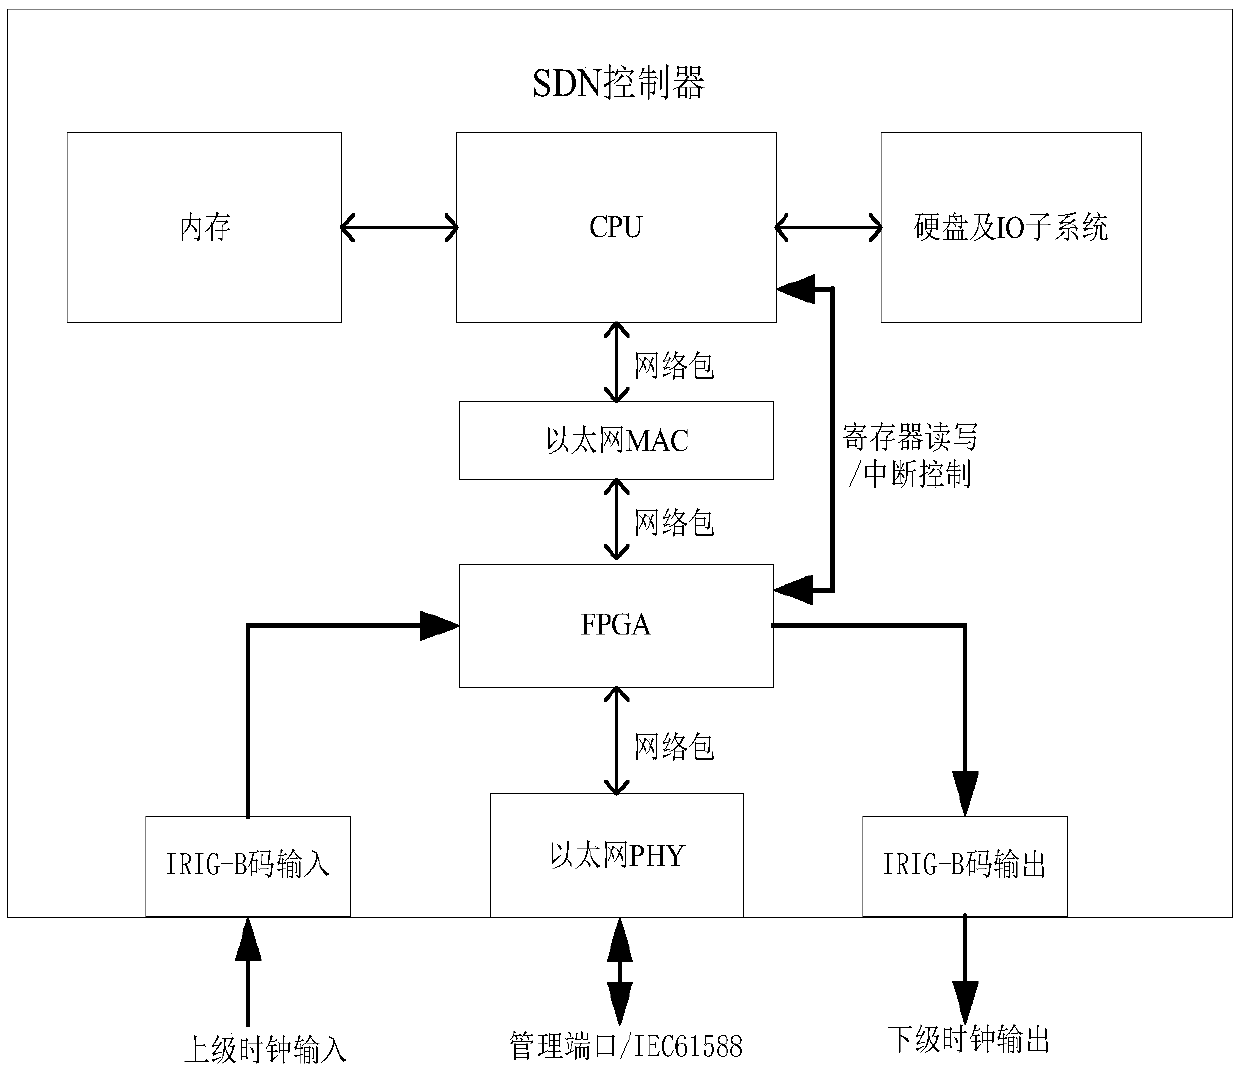 Time synchronization method and system for SDN network of intelligent substation